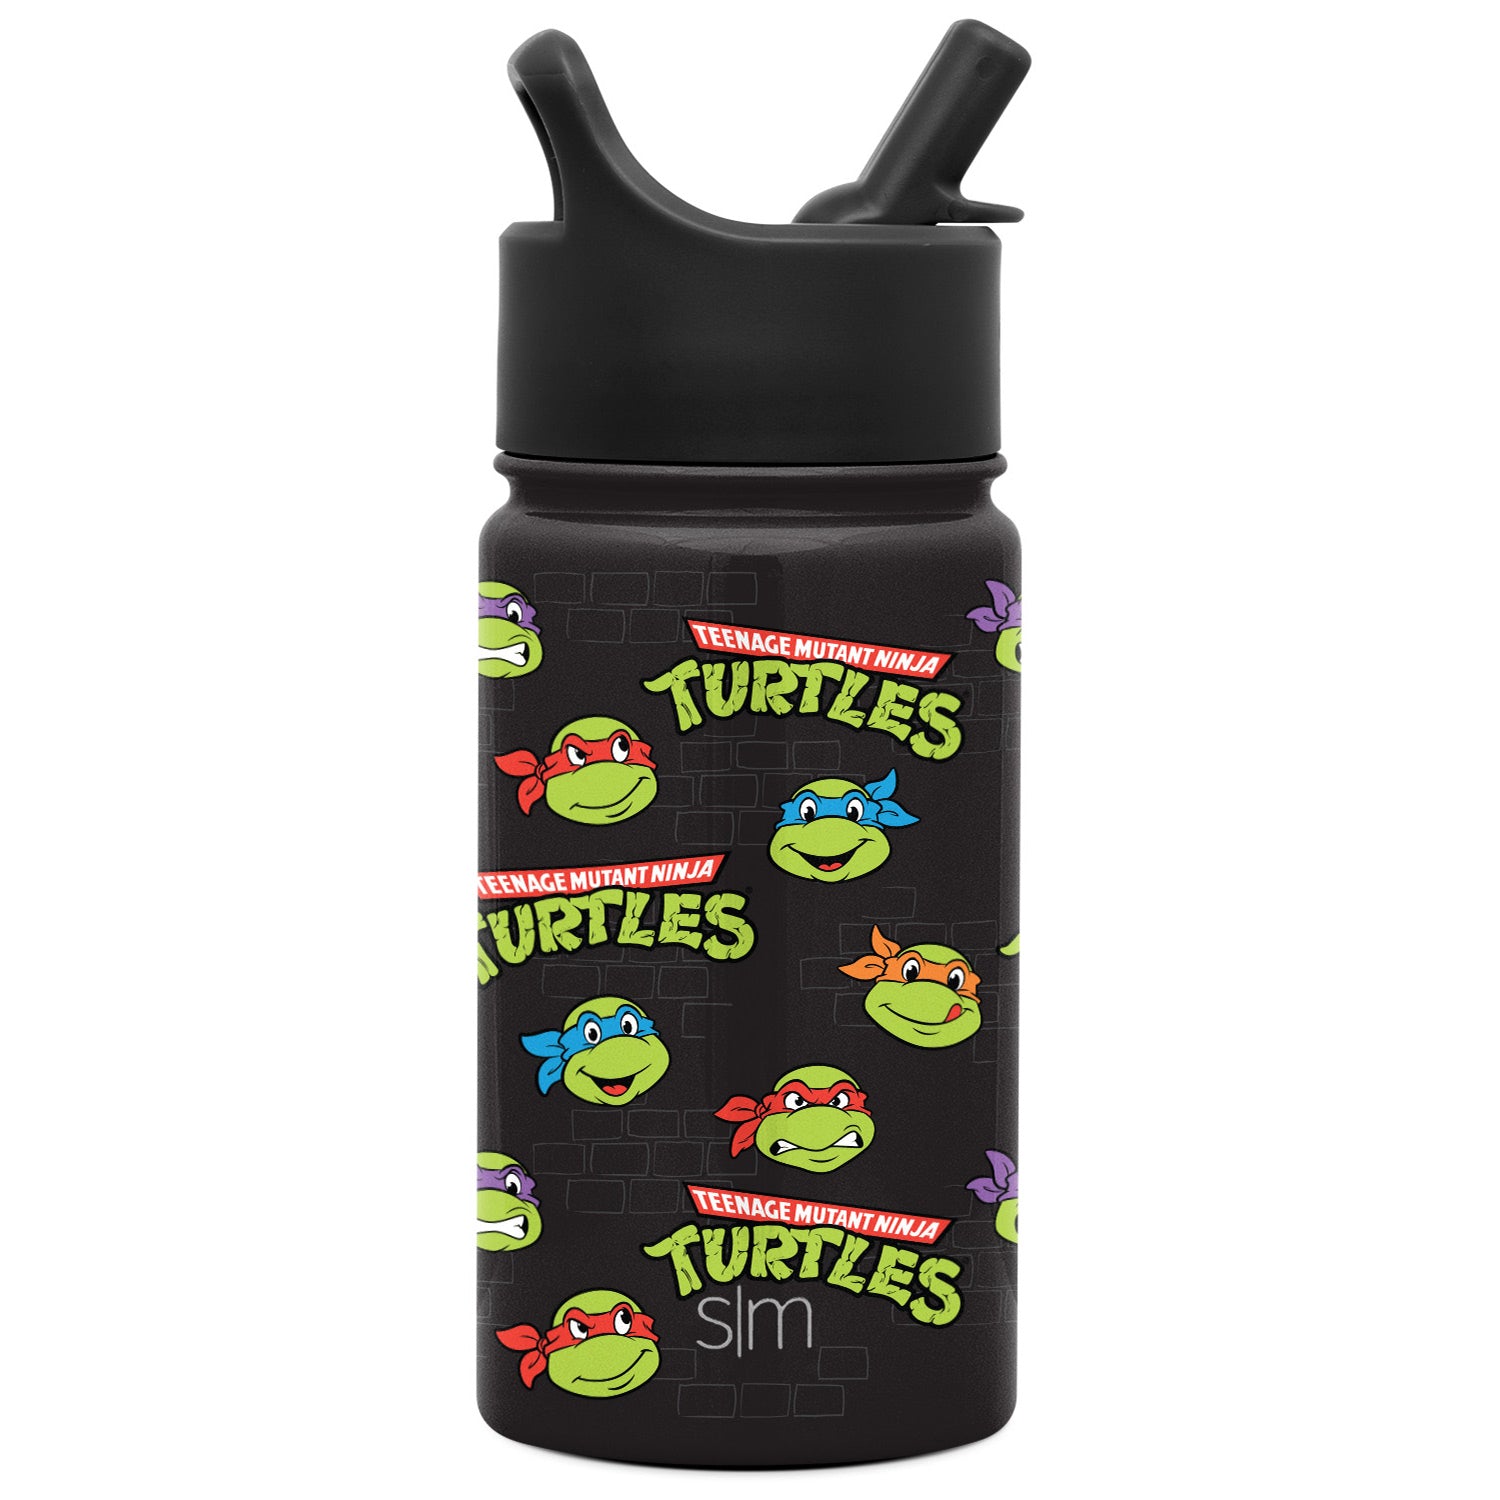 Children's water bottle with cartoon characters and flip straw against a white background.